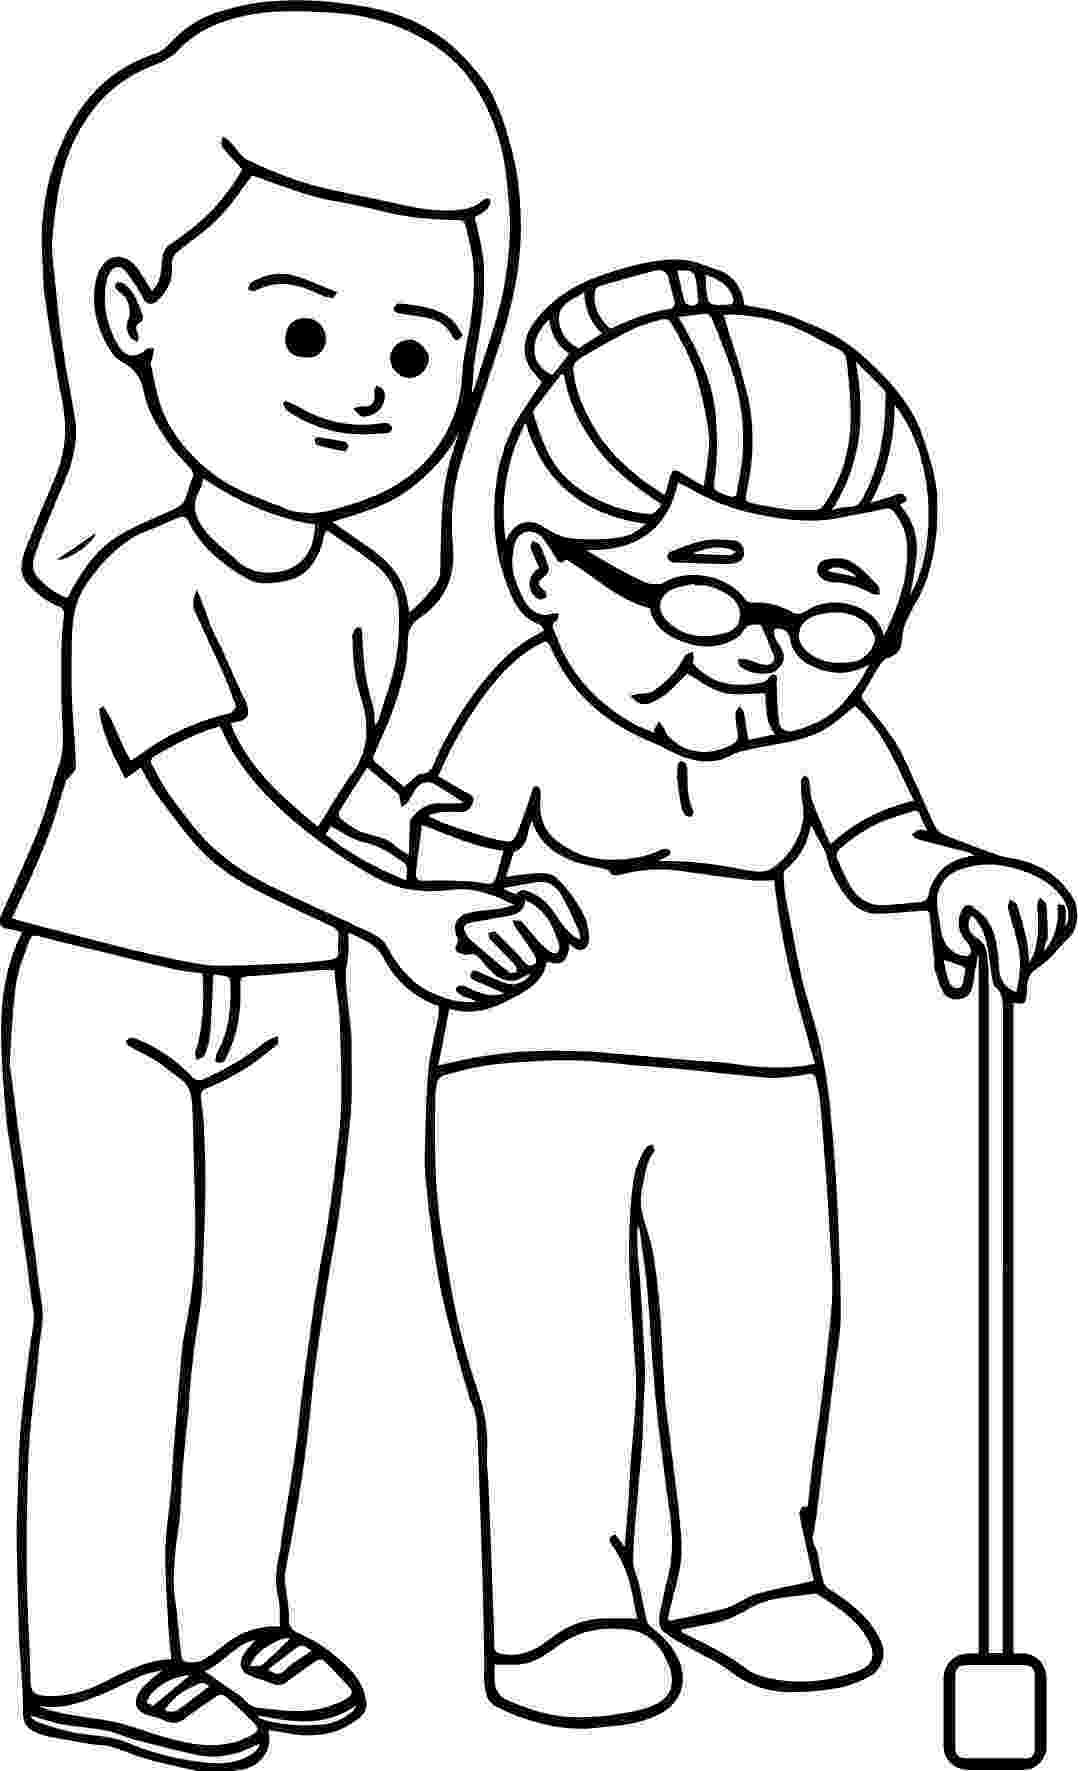 helping coloring page helping others with friends coloring pages coloring sky page helping coloring 